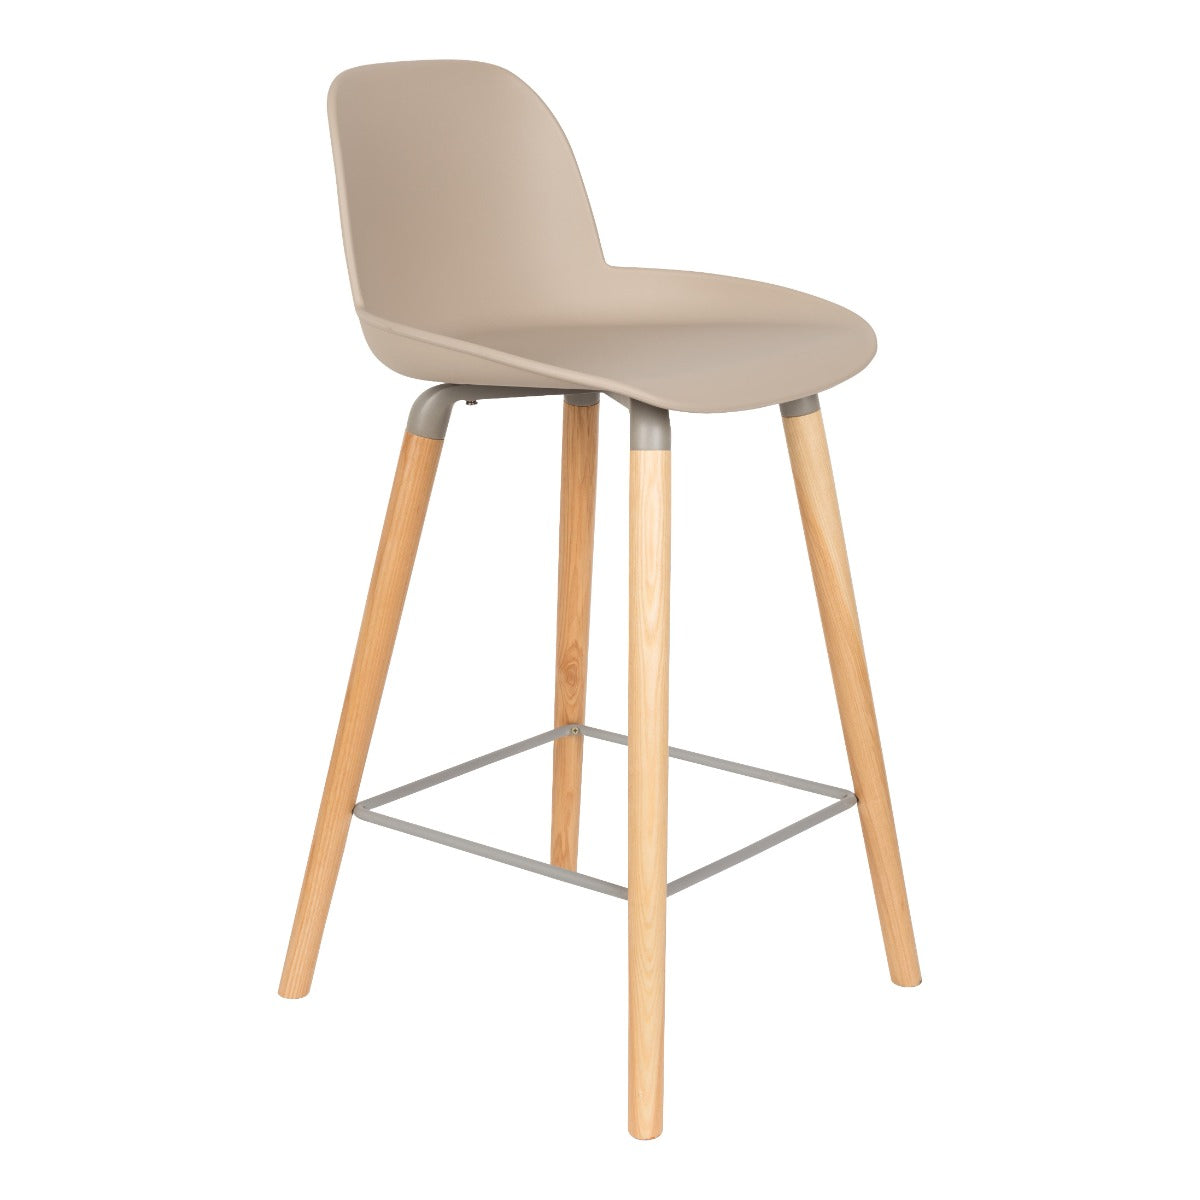 The Albert Kuip bar stool, designed by the Amsterdam Studio Ape, is an amazing combination of modern and retro style. The streamlined seat is supported by wooden, minimalist ash wood legs. It is an ideal addition to the original kitchen island or climate, hotel bar. It is also worth paying attention to a specially prepared leg place that improves sitting comfort.